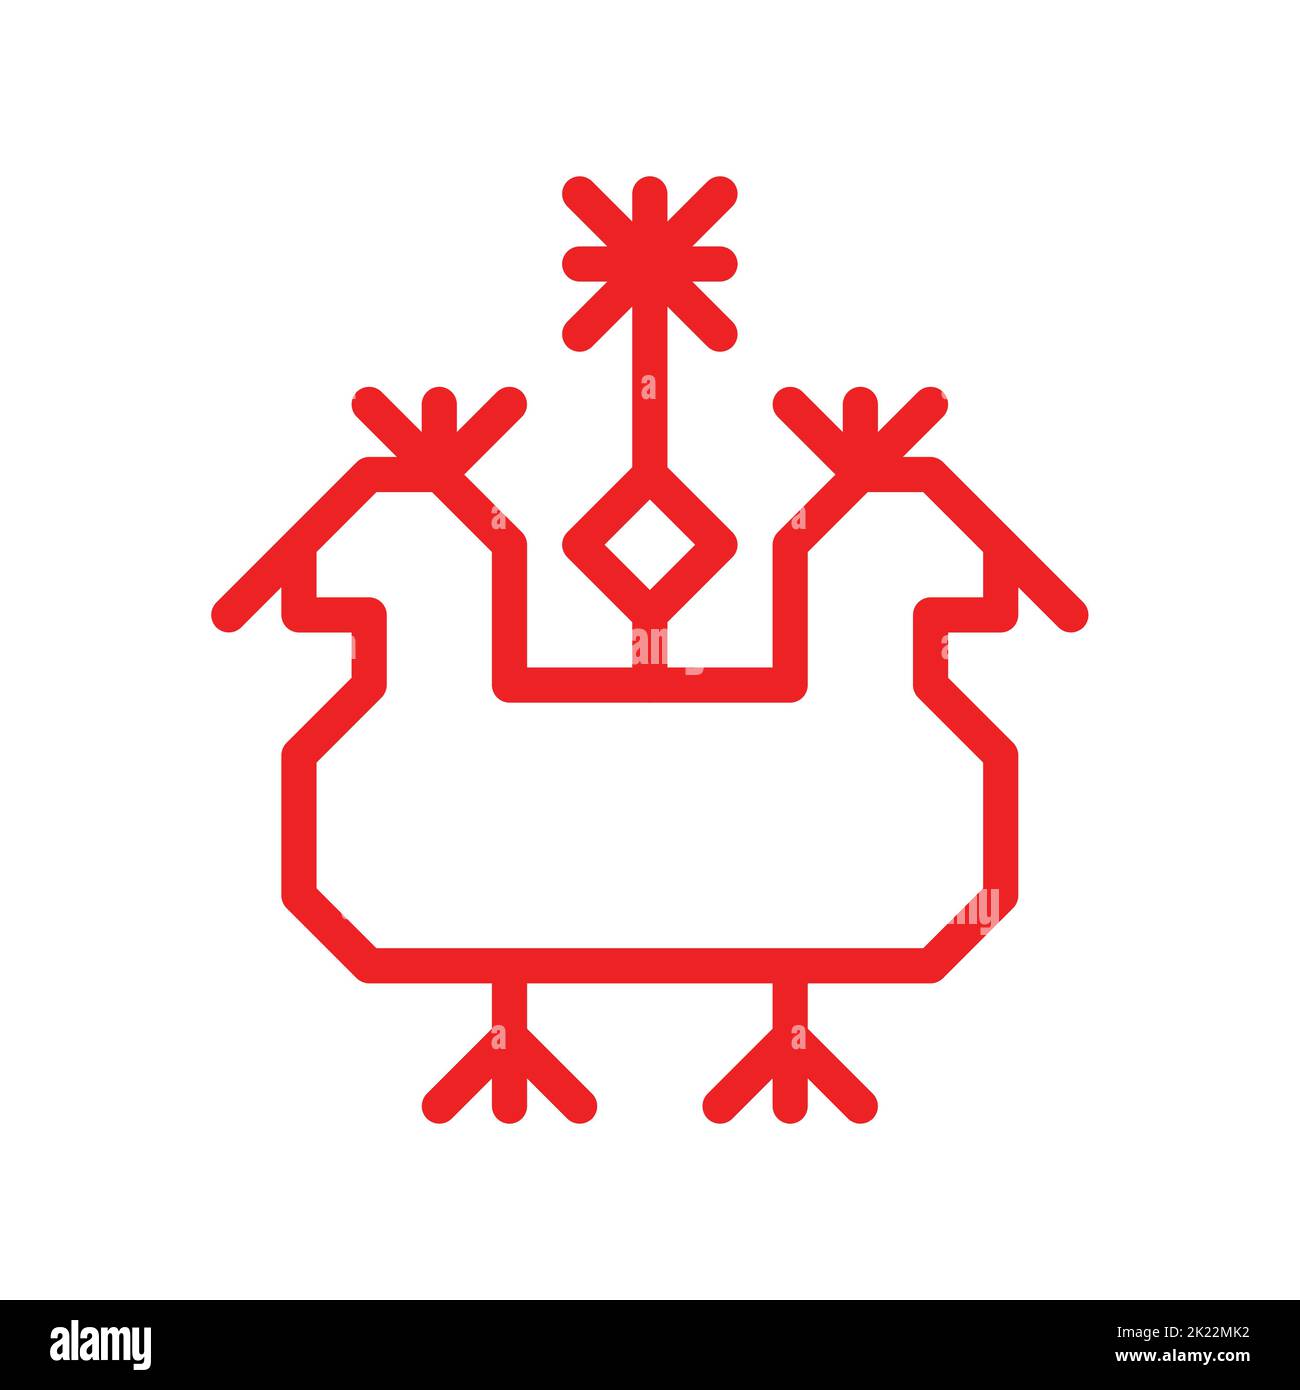 Vector isolated outline illustration with red simplified symbol of bird. Flat shape is traditional ornamental sign of Karelian and Finnish nations. De Stock Vector